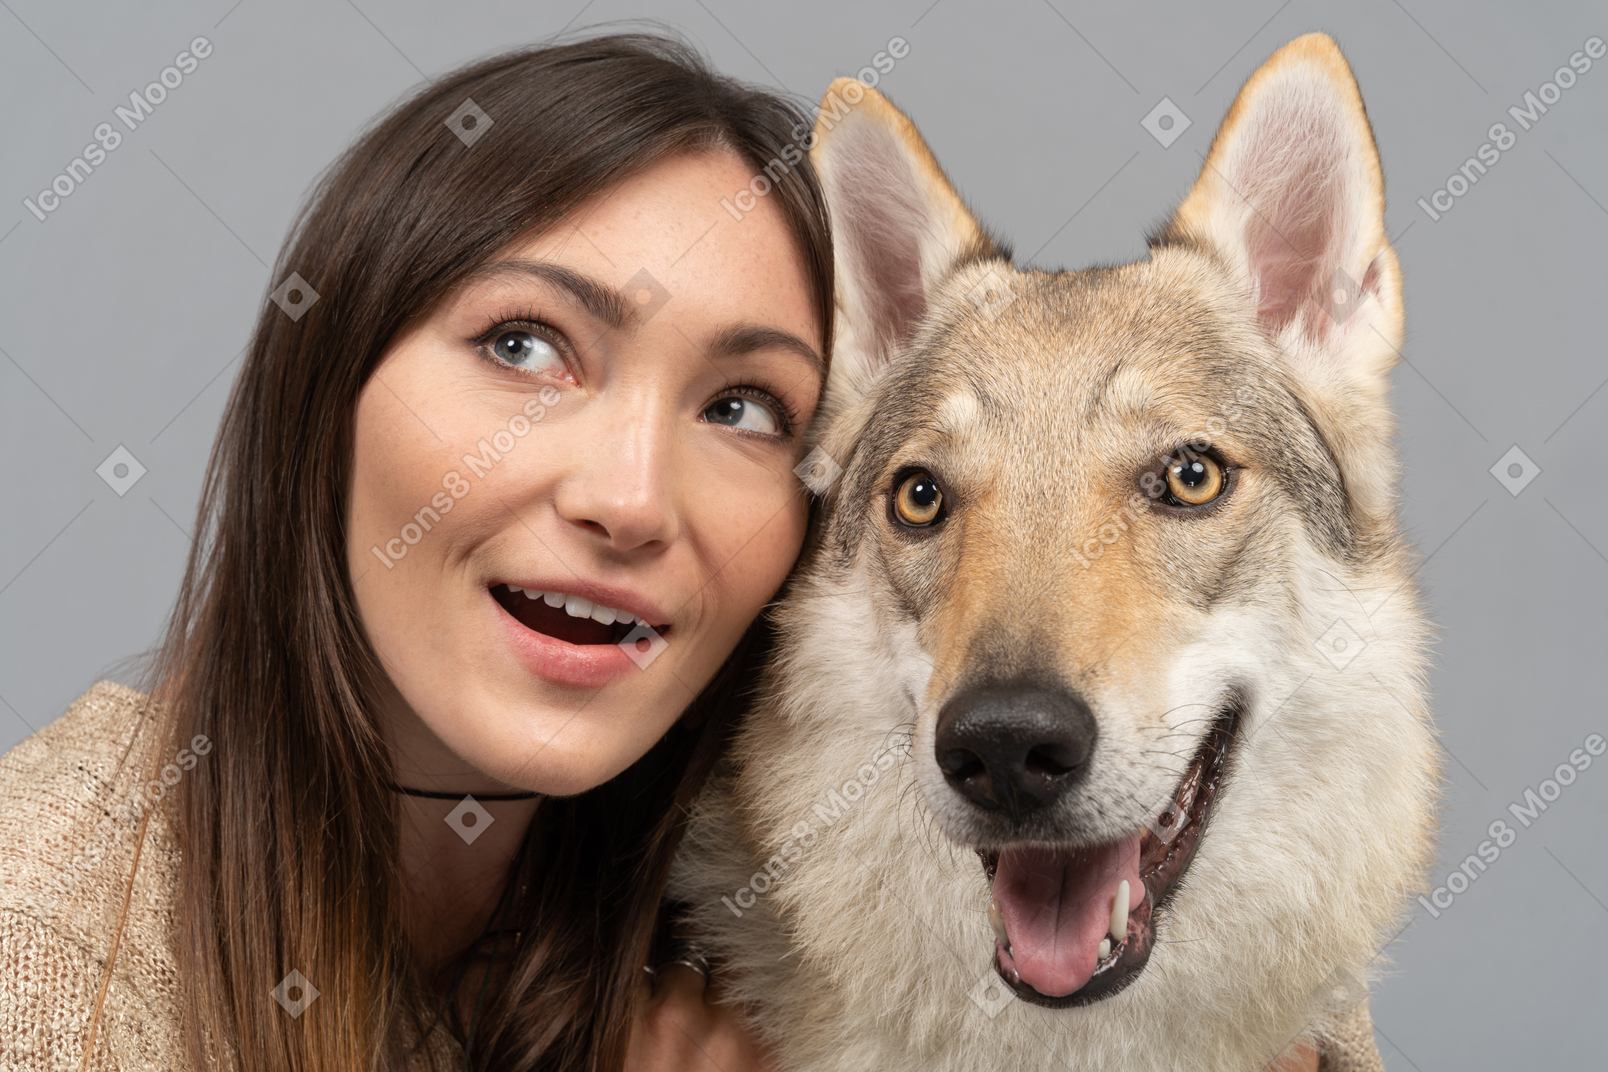 Young woman and purebred dog looking sideways